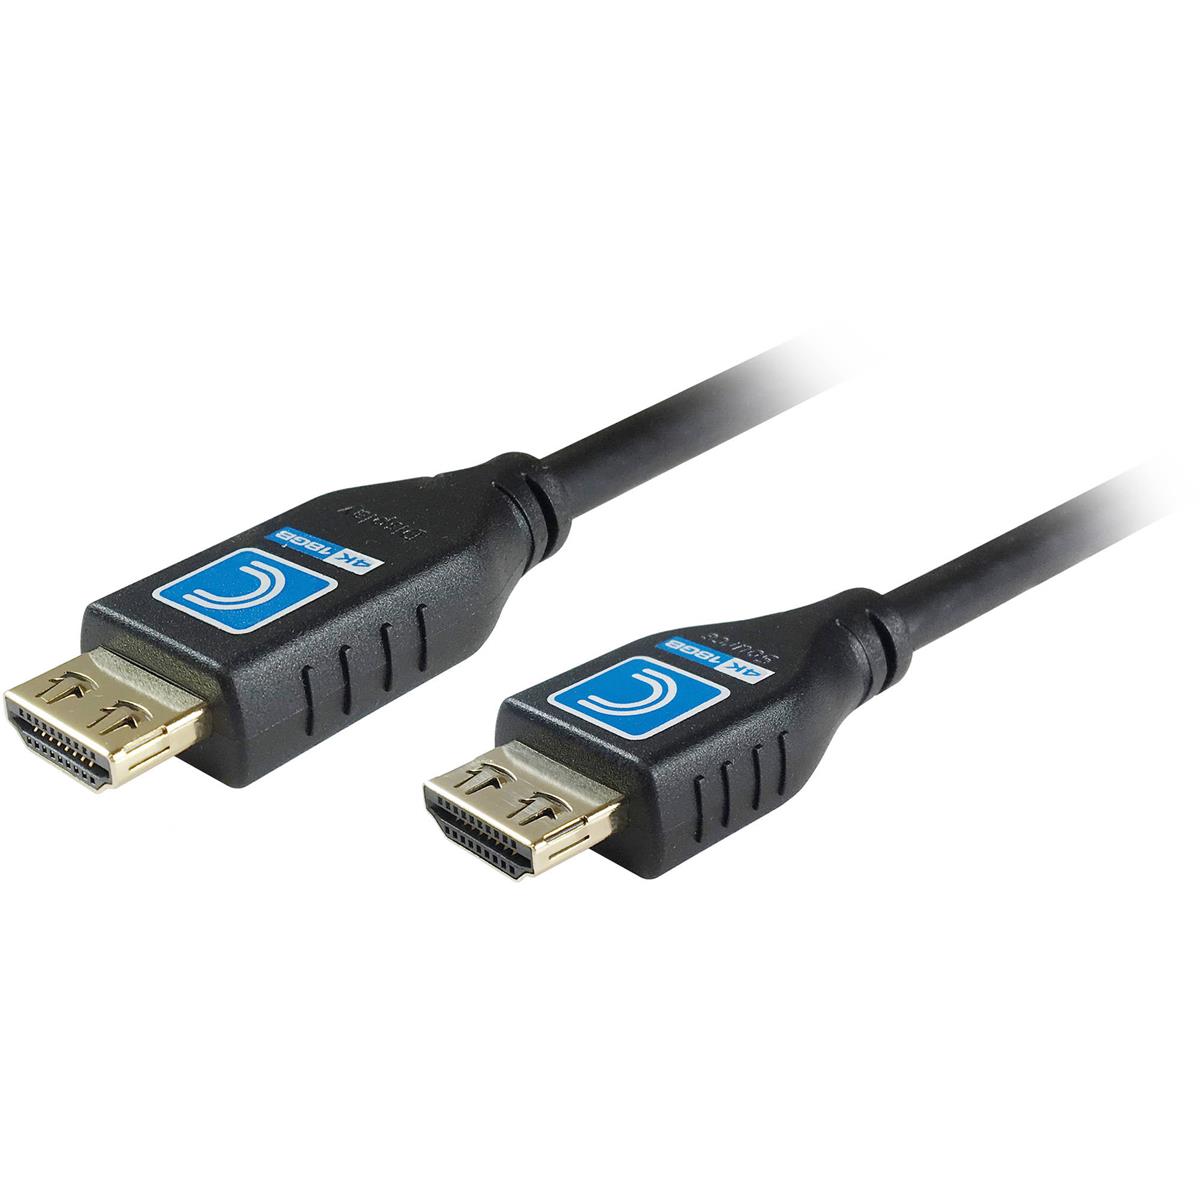 Image of Comprehensive MicroFlex Active Pro AV/IT 18G HDMI to HDMI Cable